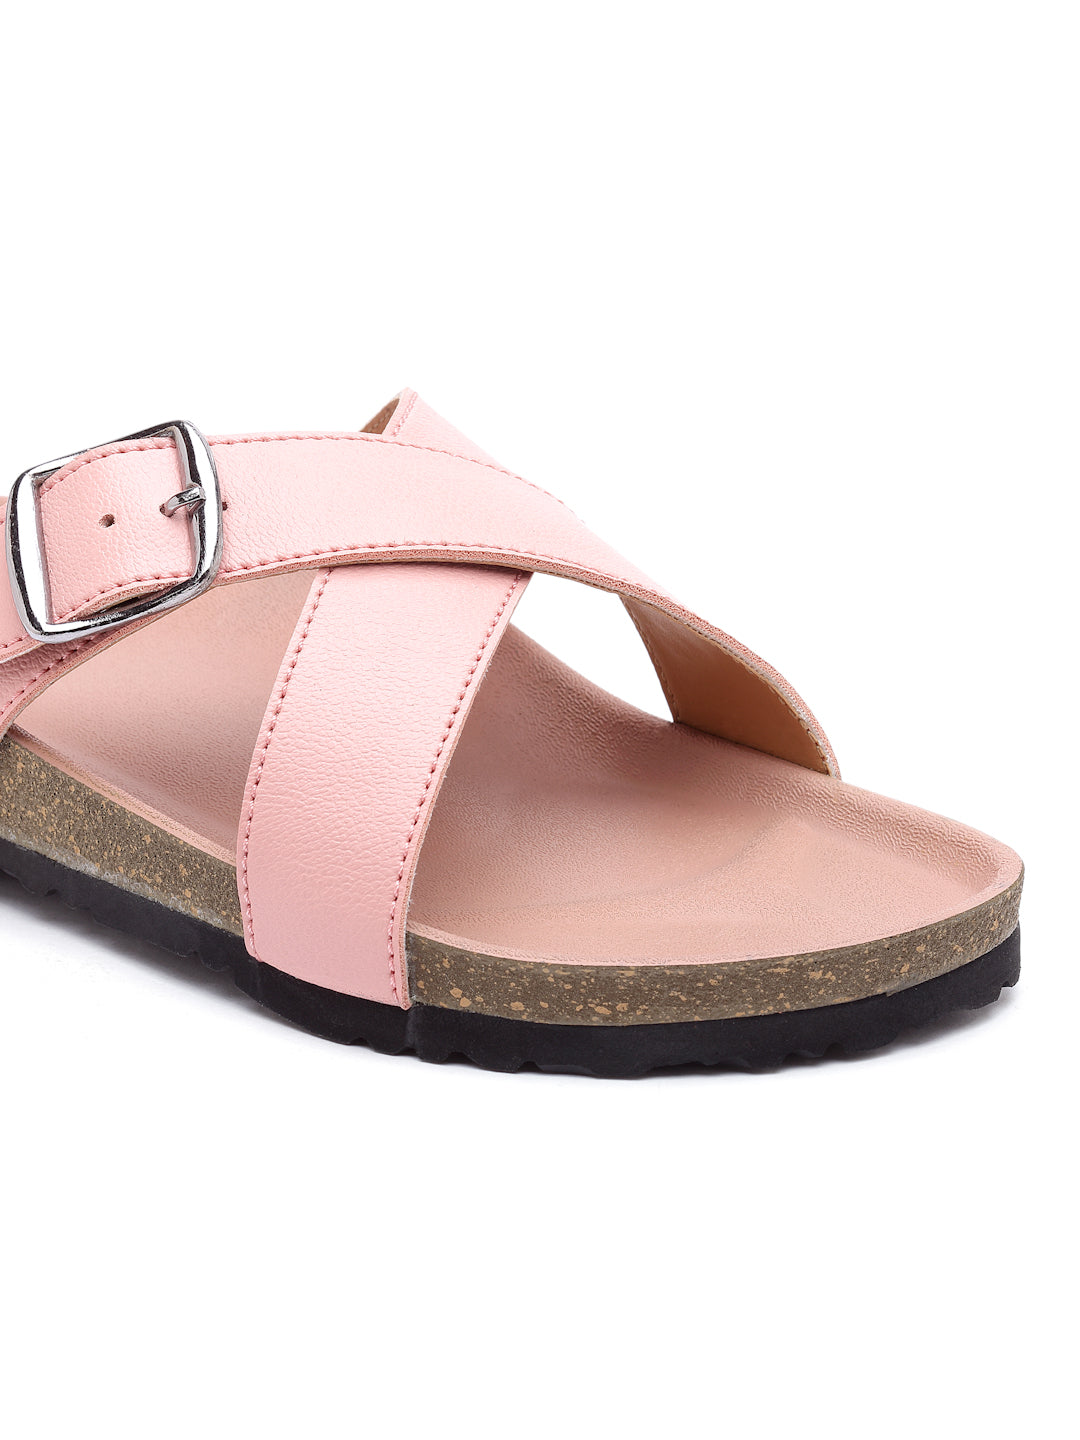 Women's Stylish Pink Synthetic Leather Casual Sandal